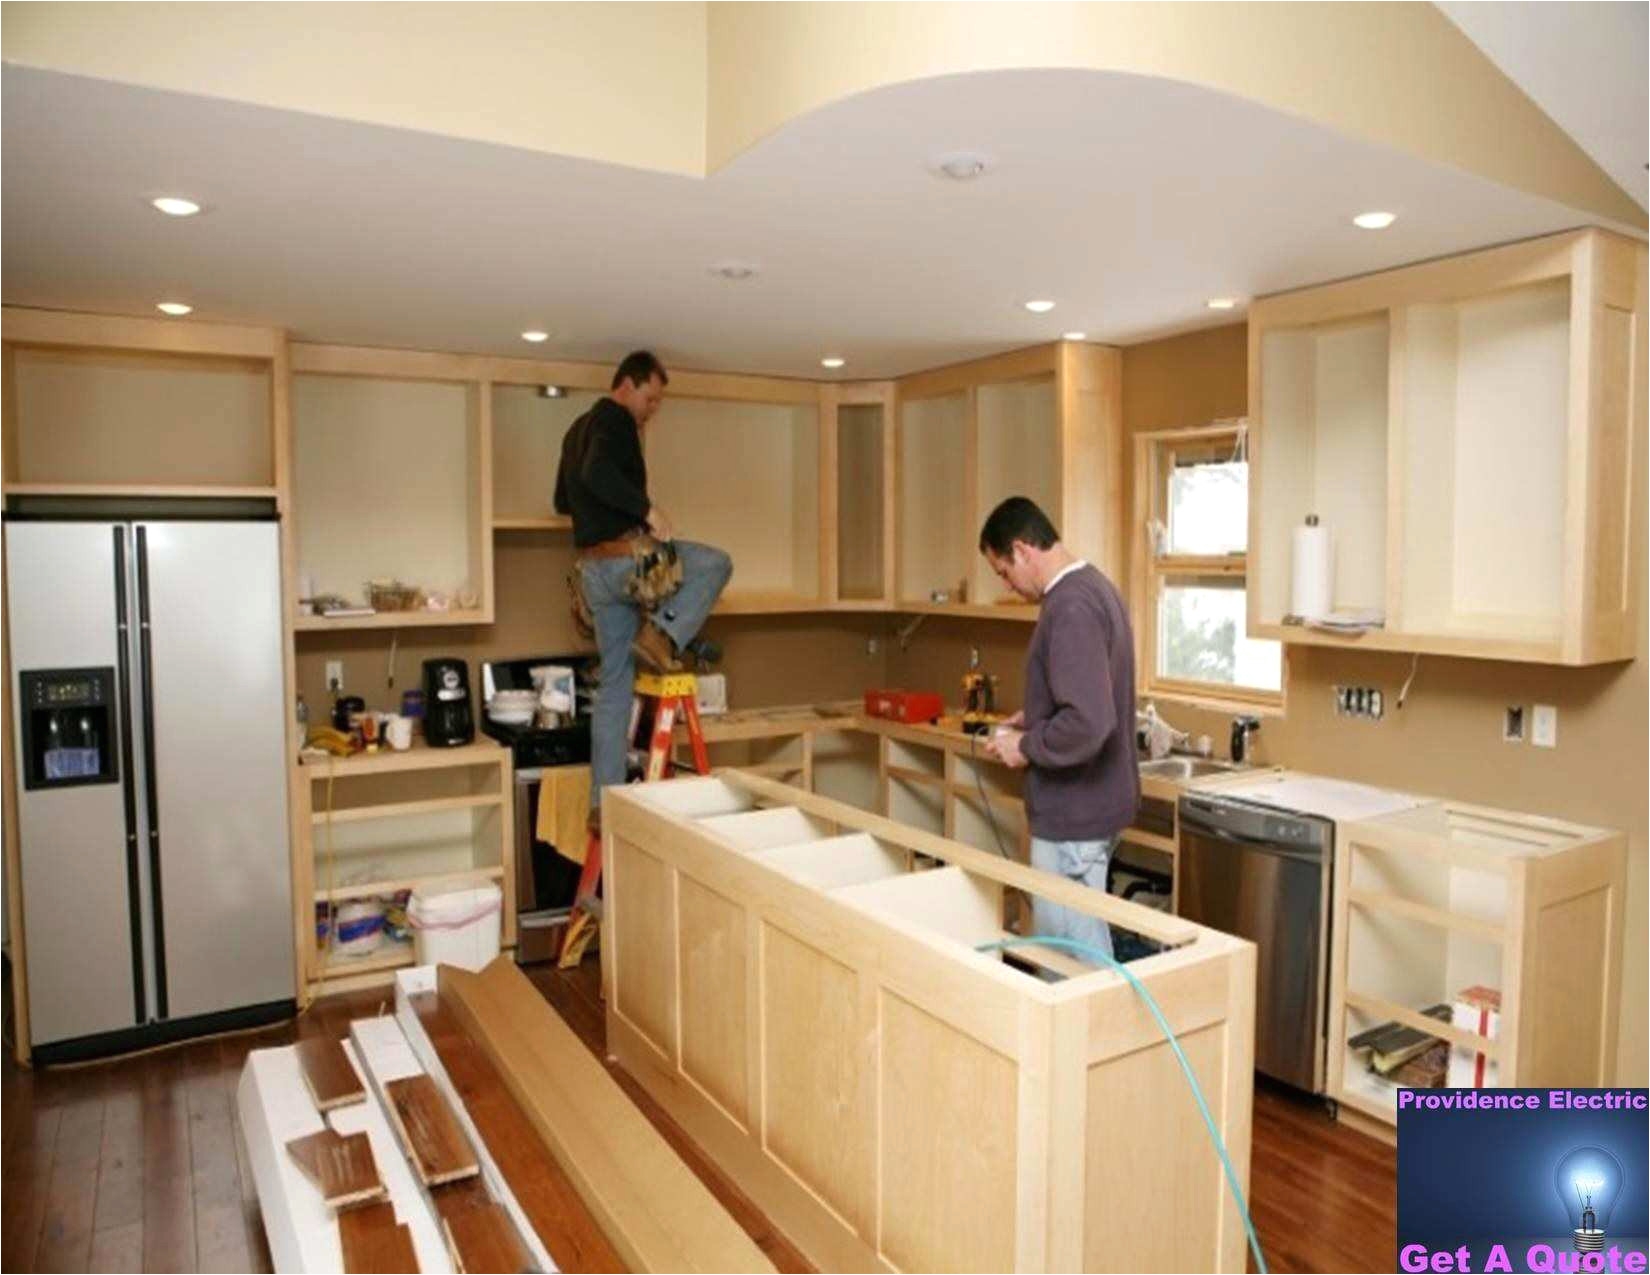 comely what size recessed lights for kitchen at 28 luxury kitchen recessed lighting layout trinitycountyfoodbank